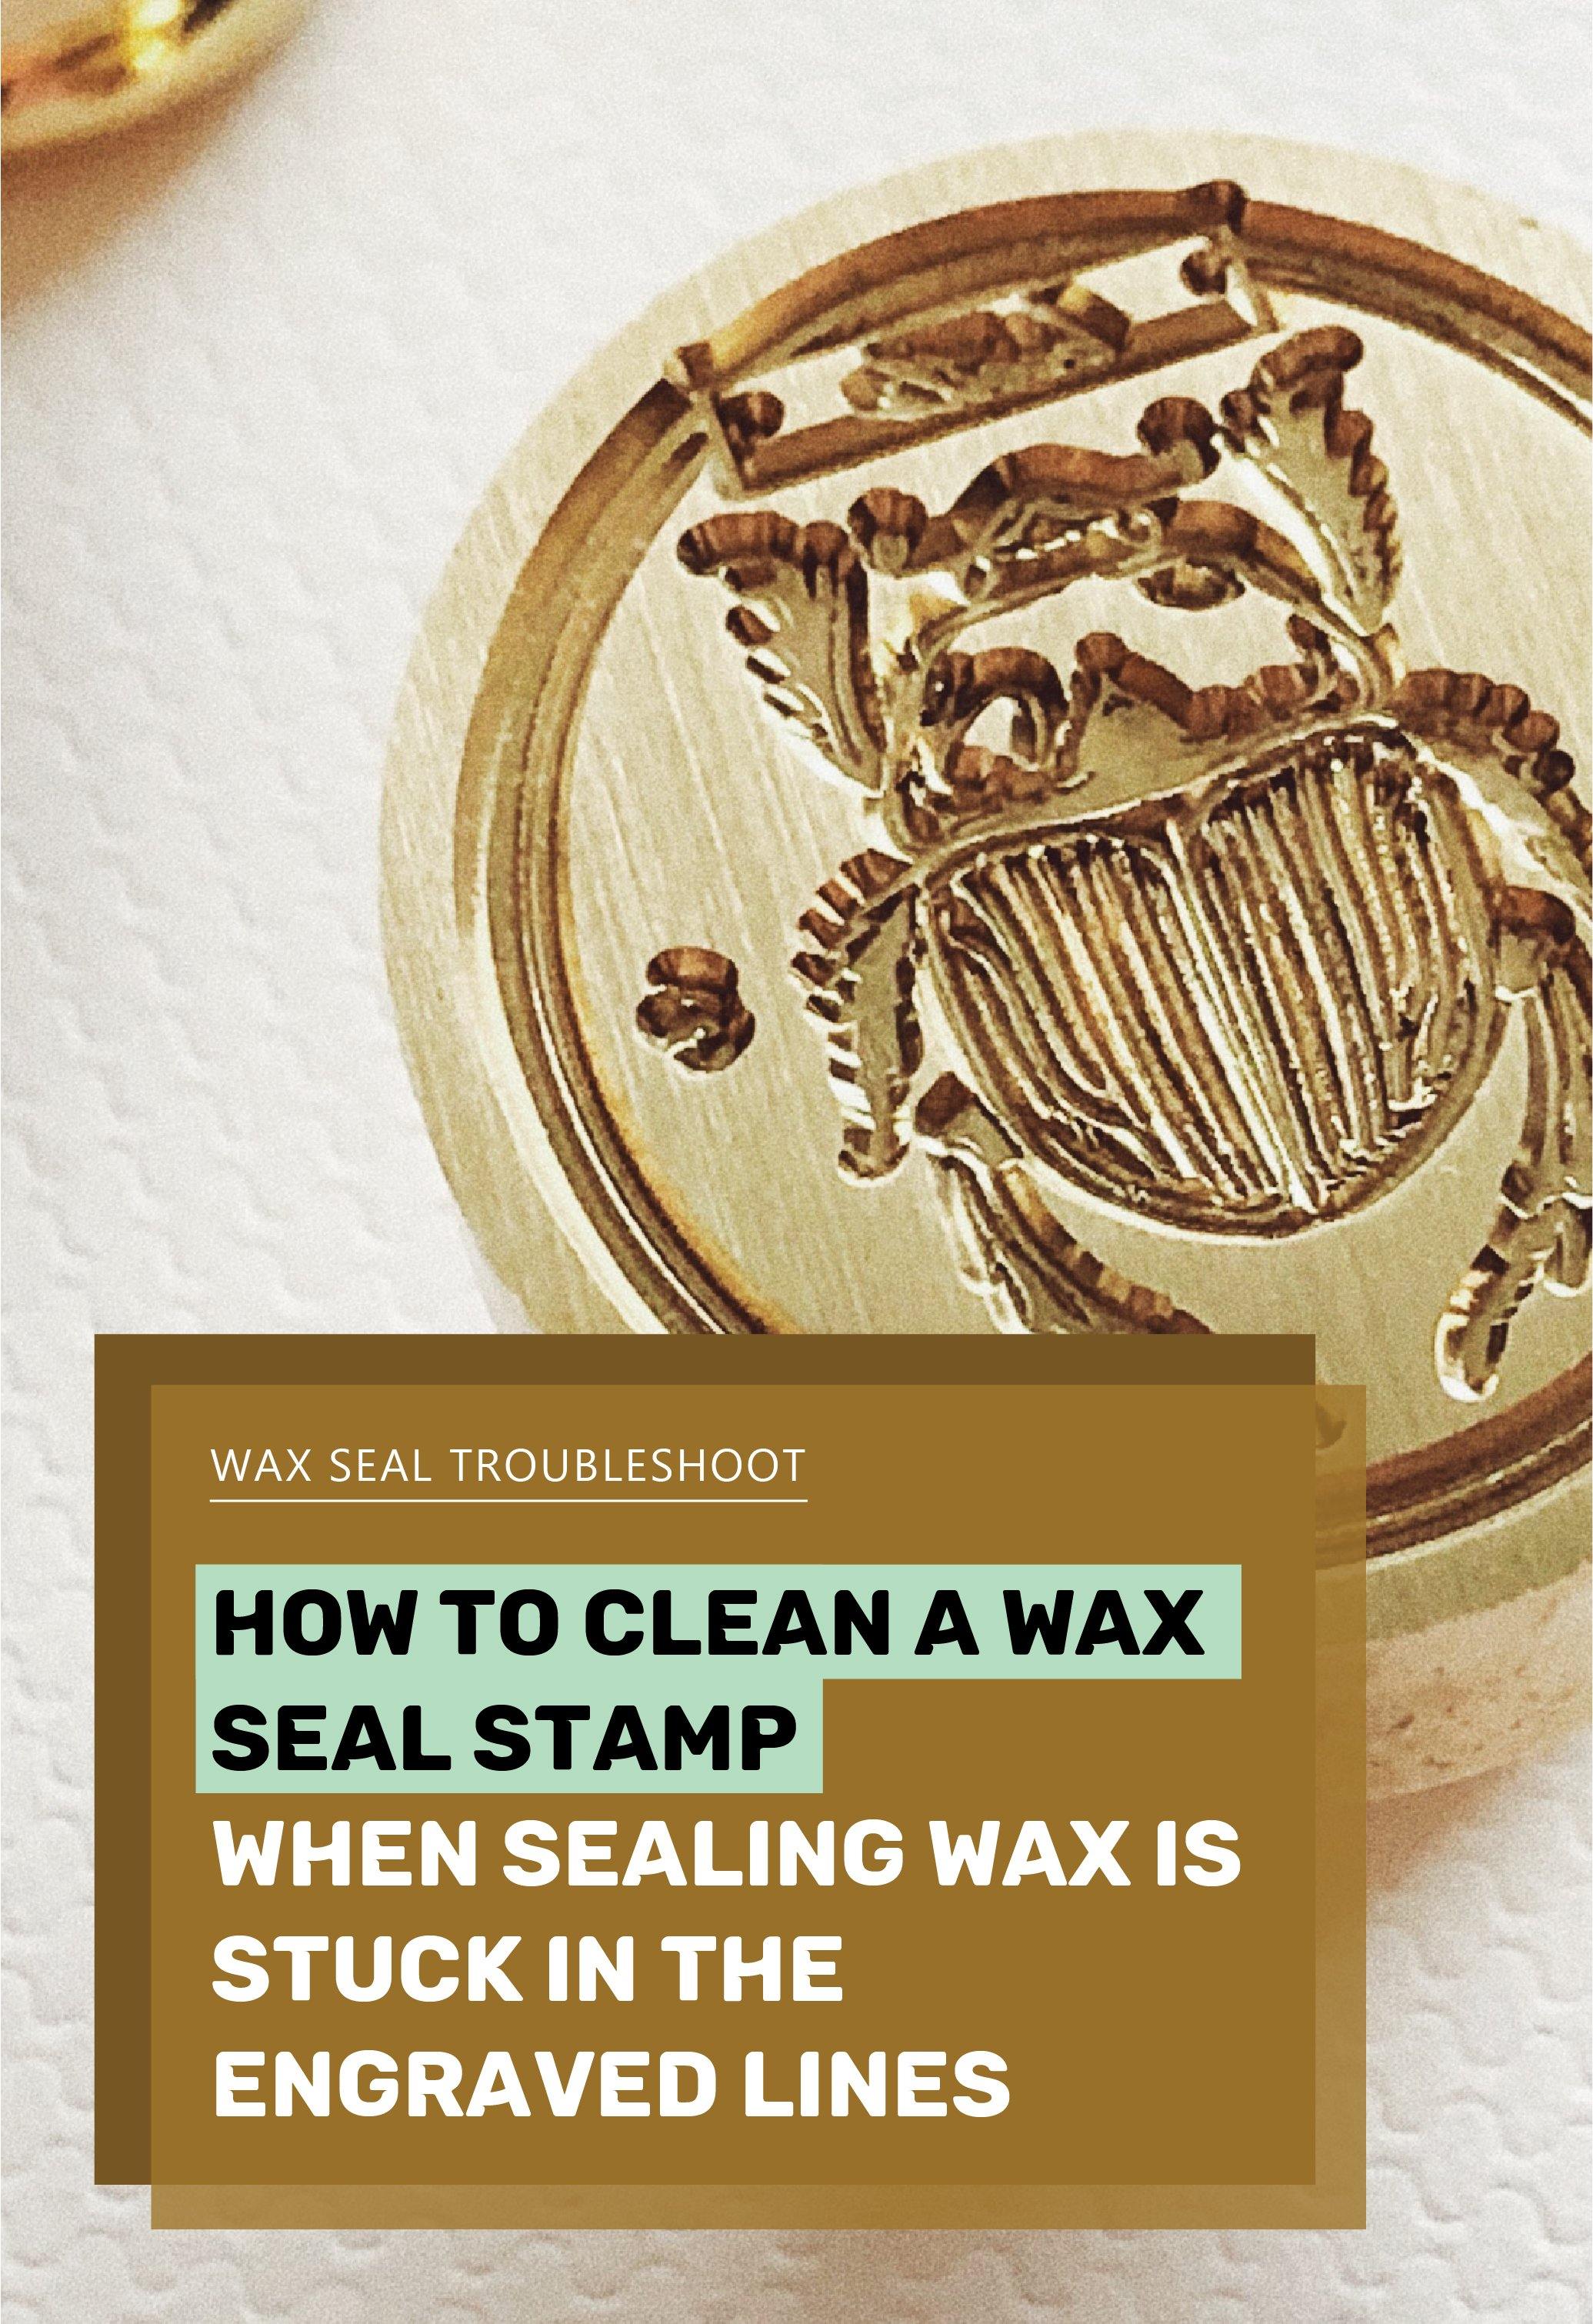 How To Make a Good Wax Seal (Troubleshoot)